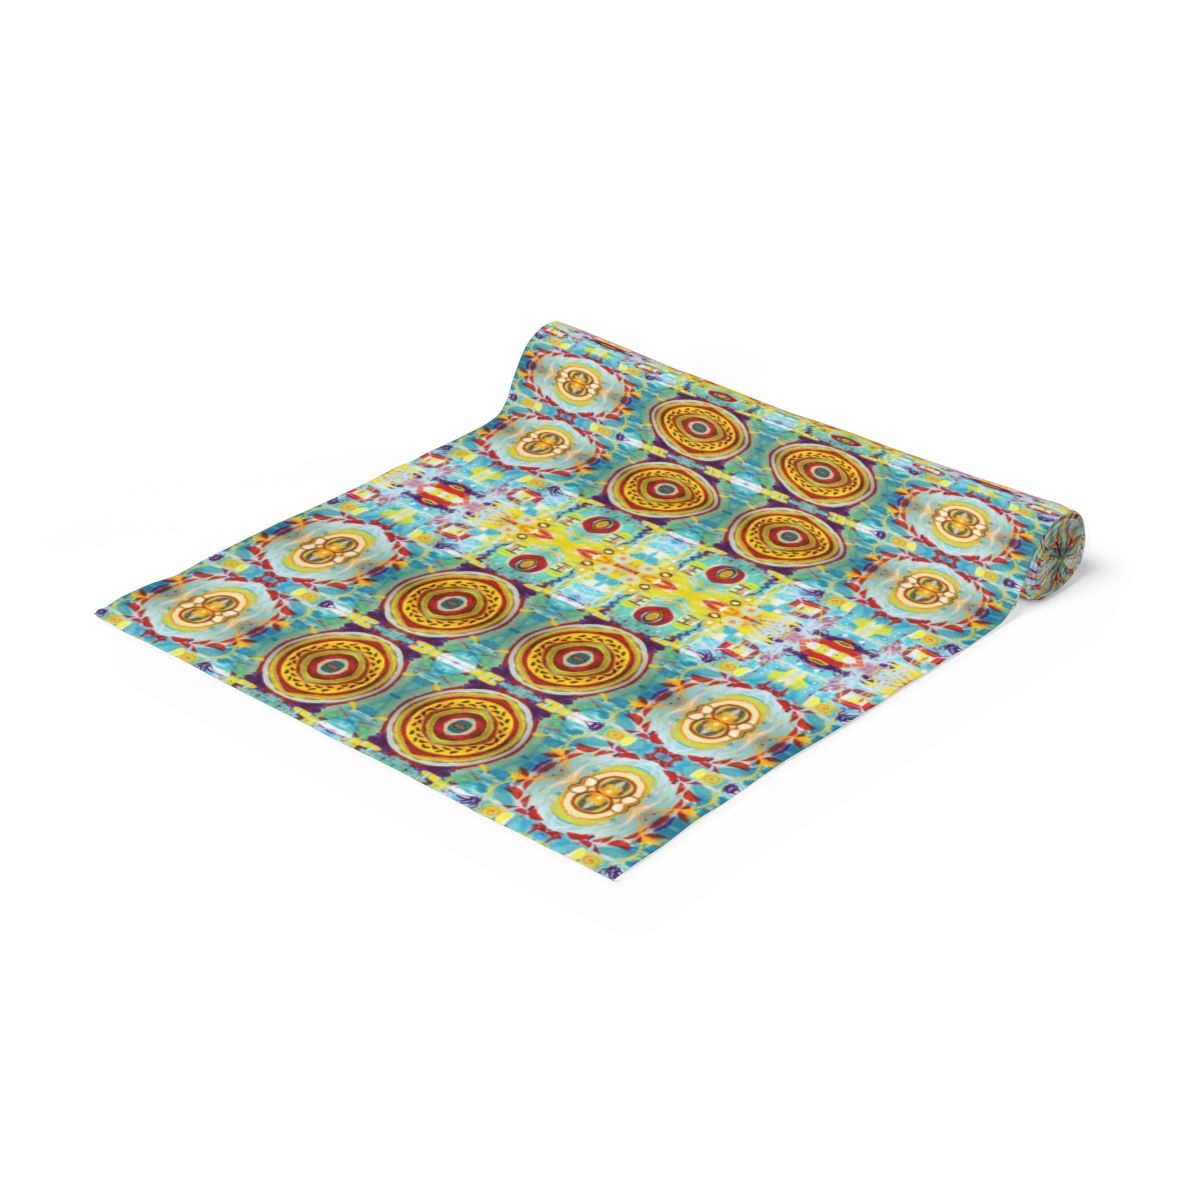 table runner by artist Jeweliyana with a colorful modern abstract pattern